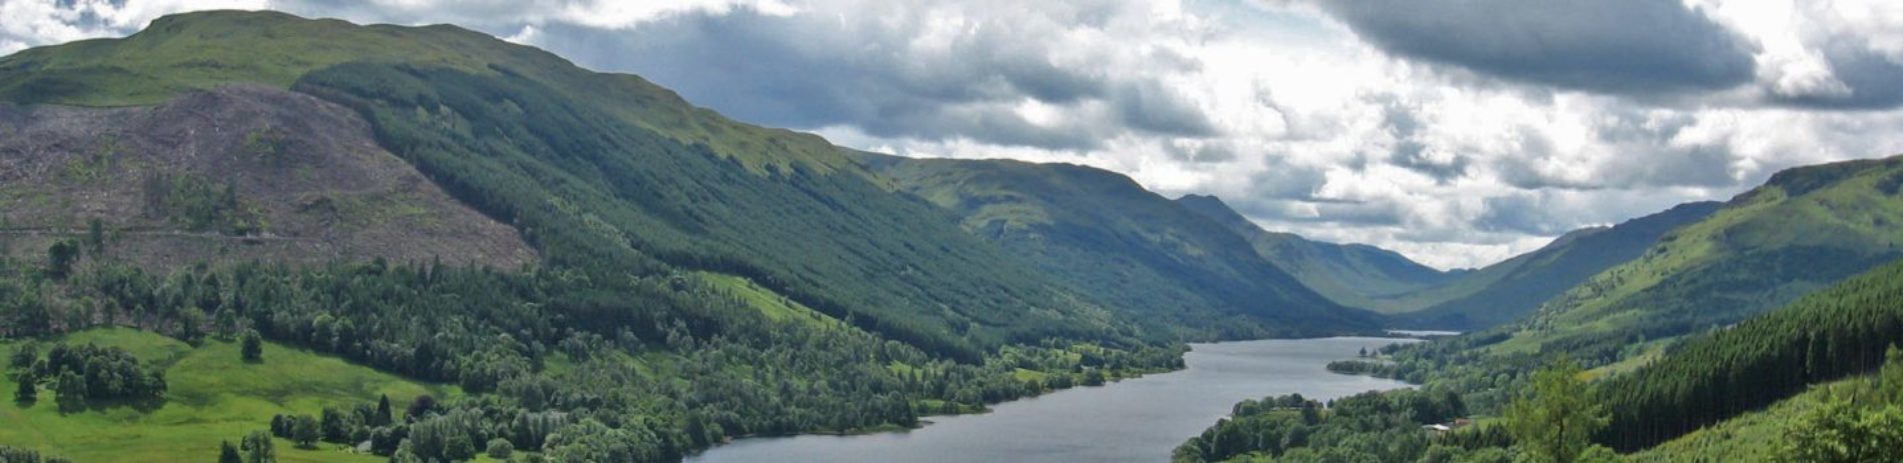 stunning-view-of-balquhidder-glen-and-loch-voil-from-creag-an-tuirc-summit